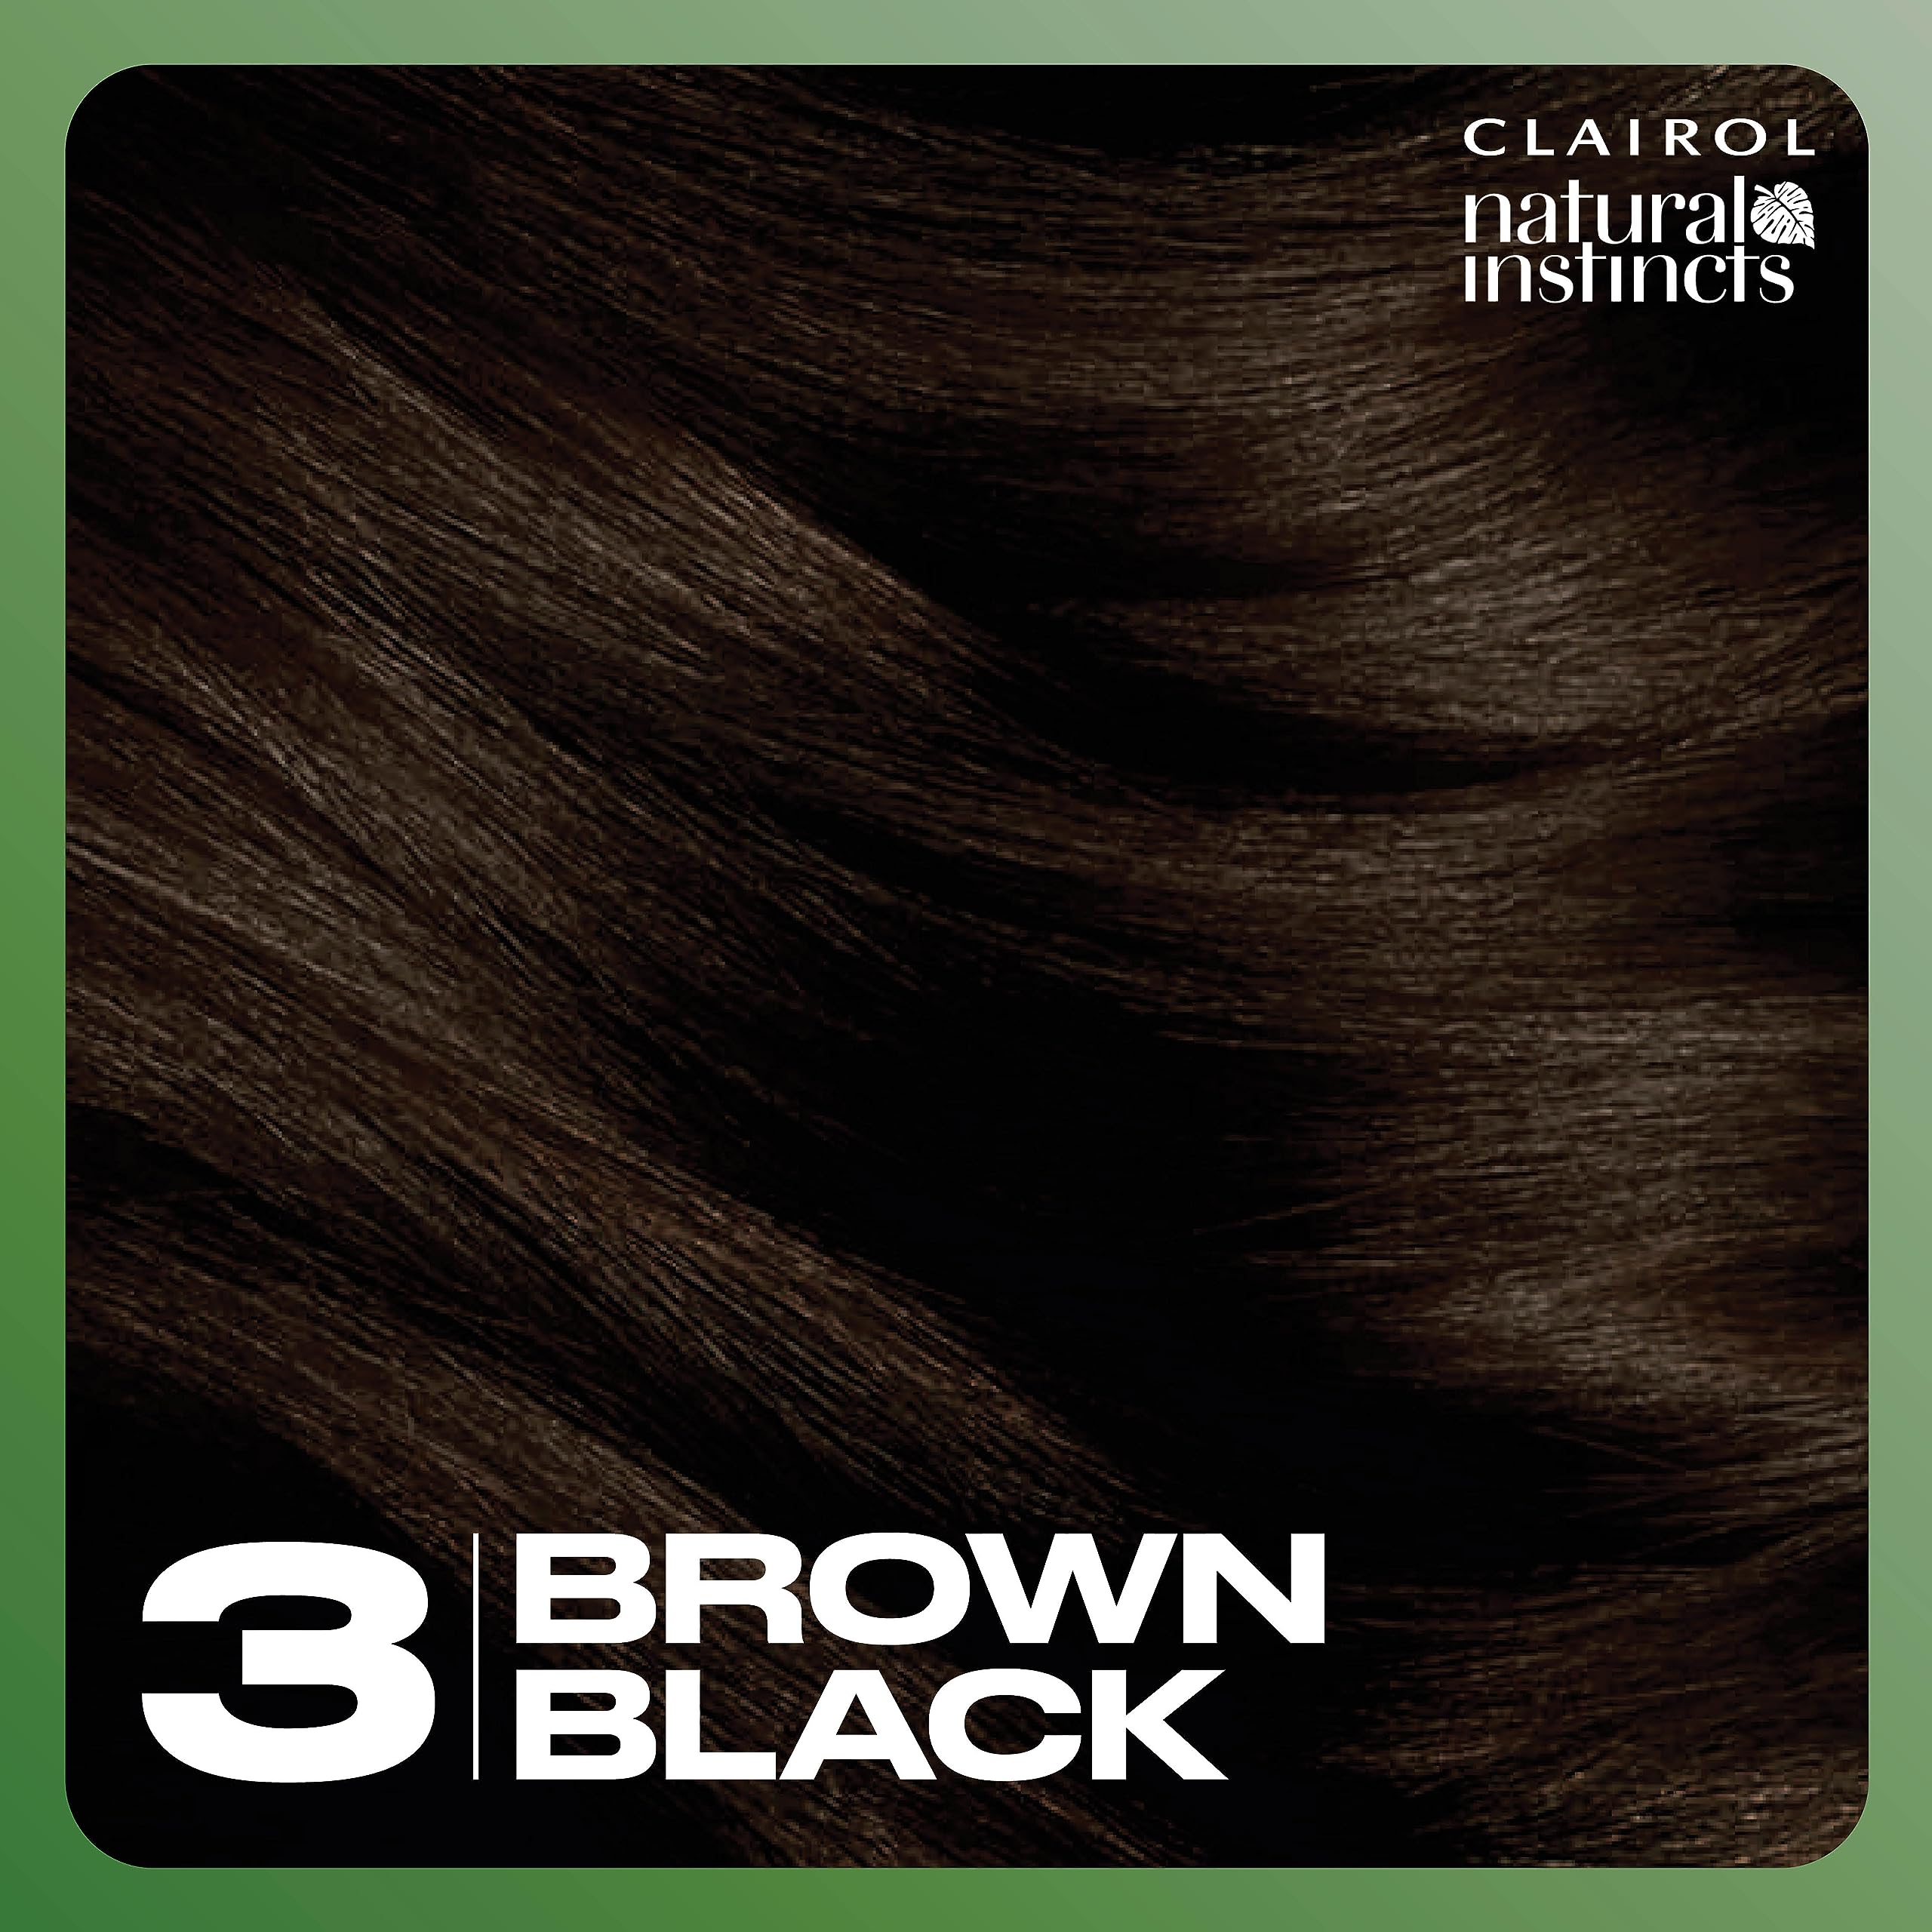 Clairol Natural Instincts Demi-Permanent Hair Dye, 3 Brown Black Hair Color, Pack of 1